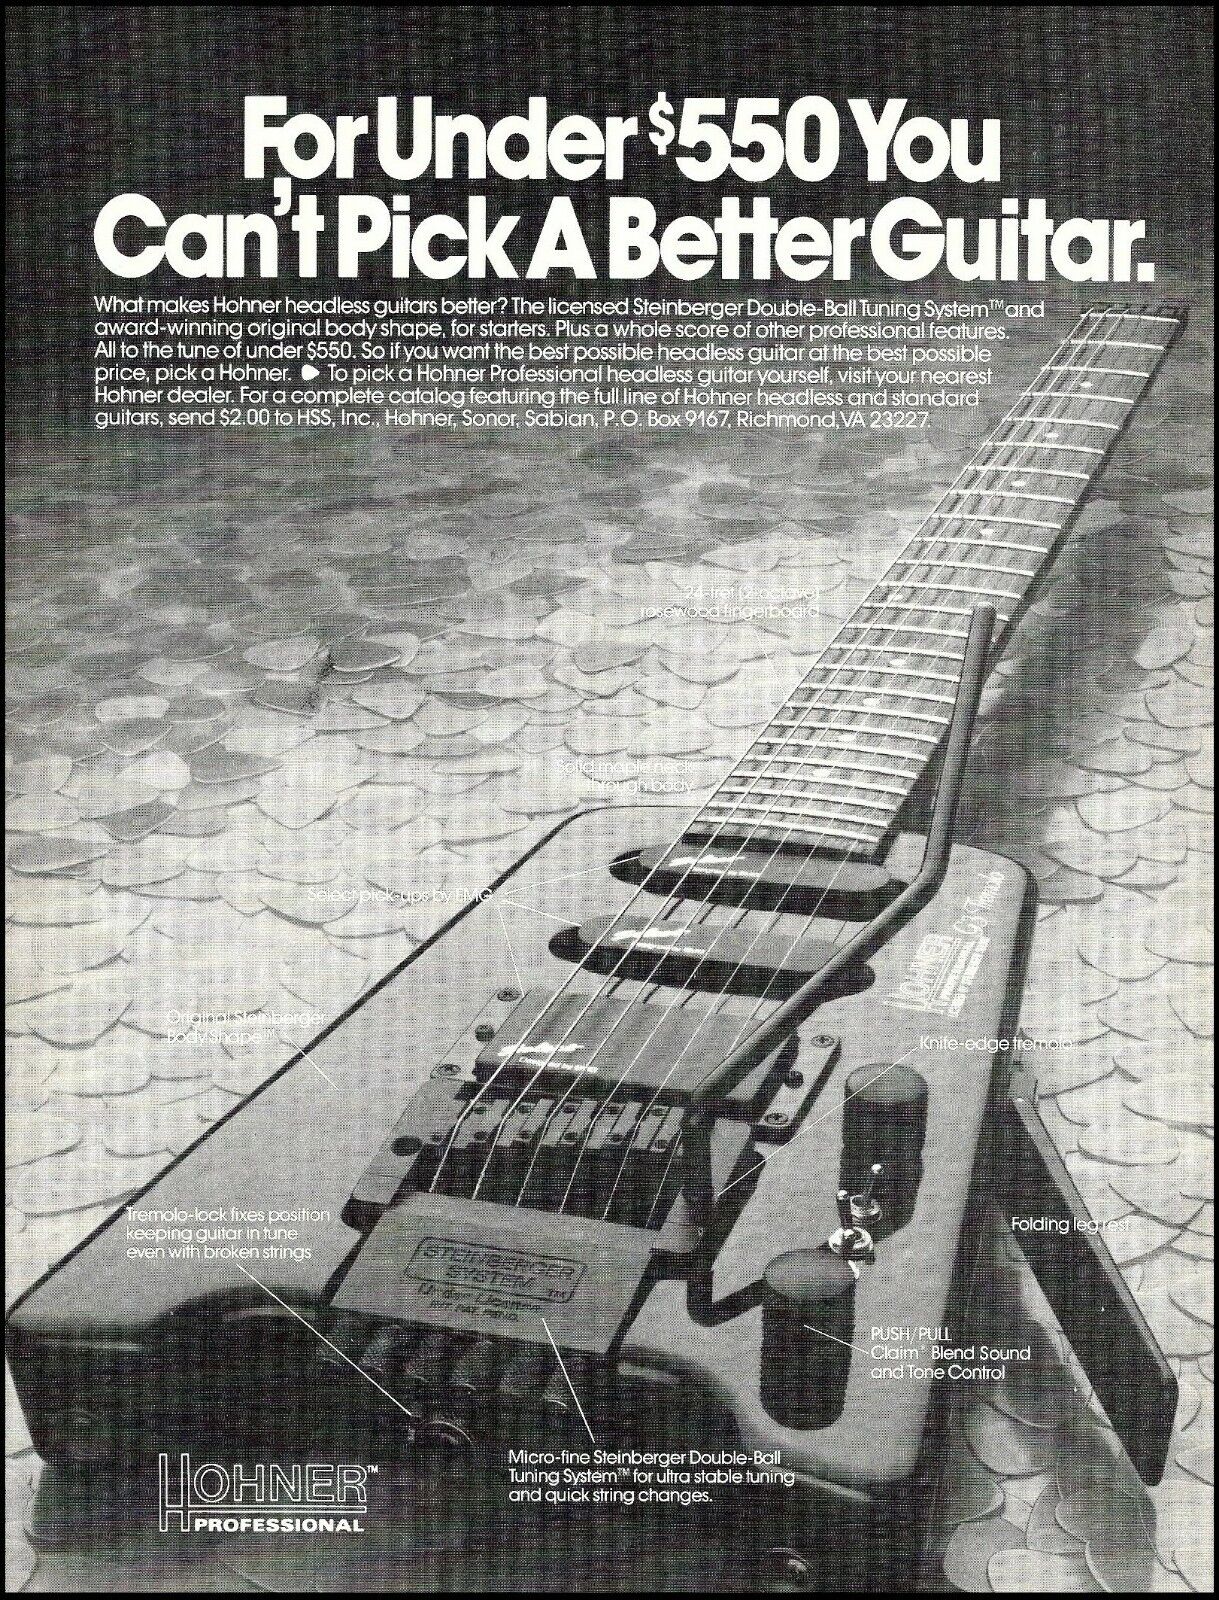 Hohner headless guitar with Steinberger Double-Ball Tuning System 1988 ad print